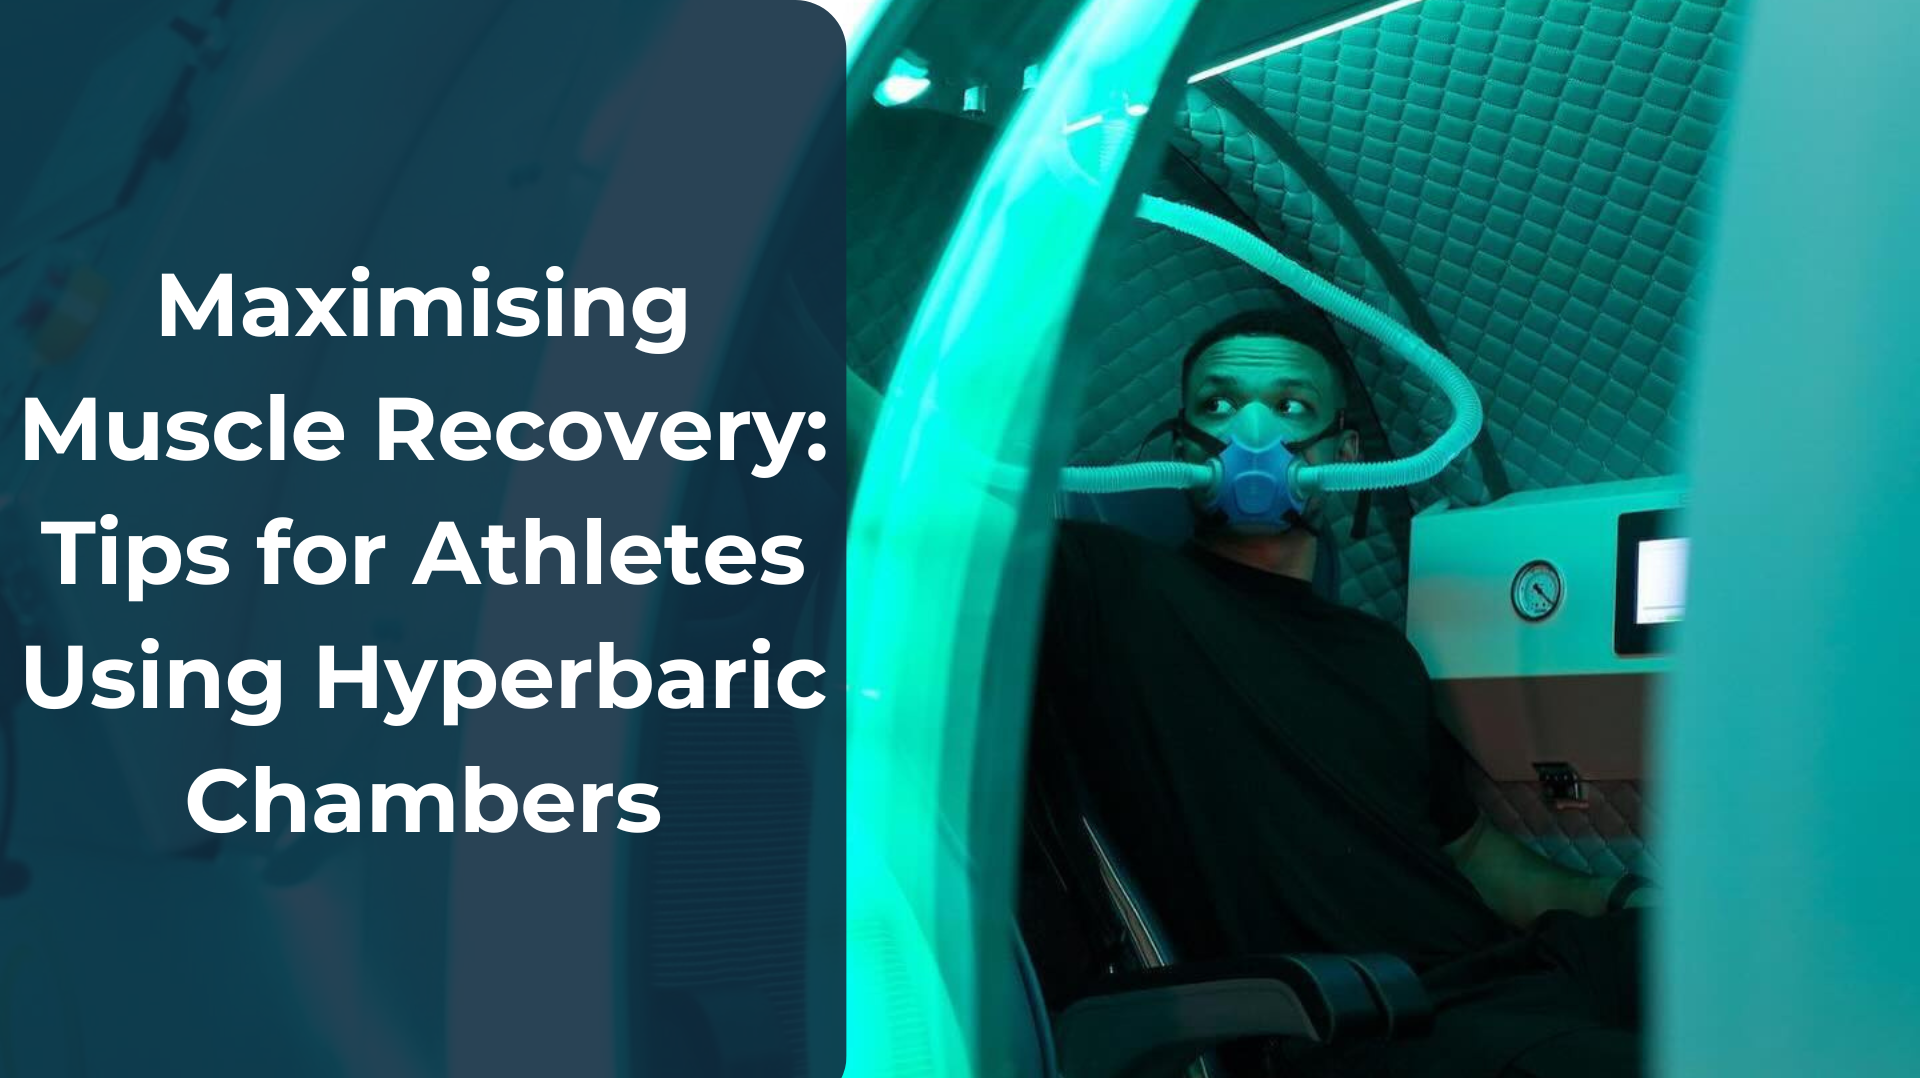 Maximising Muscle Recovery | Tips for Athletes Using Hyperbaric Chambers